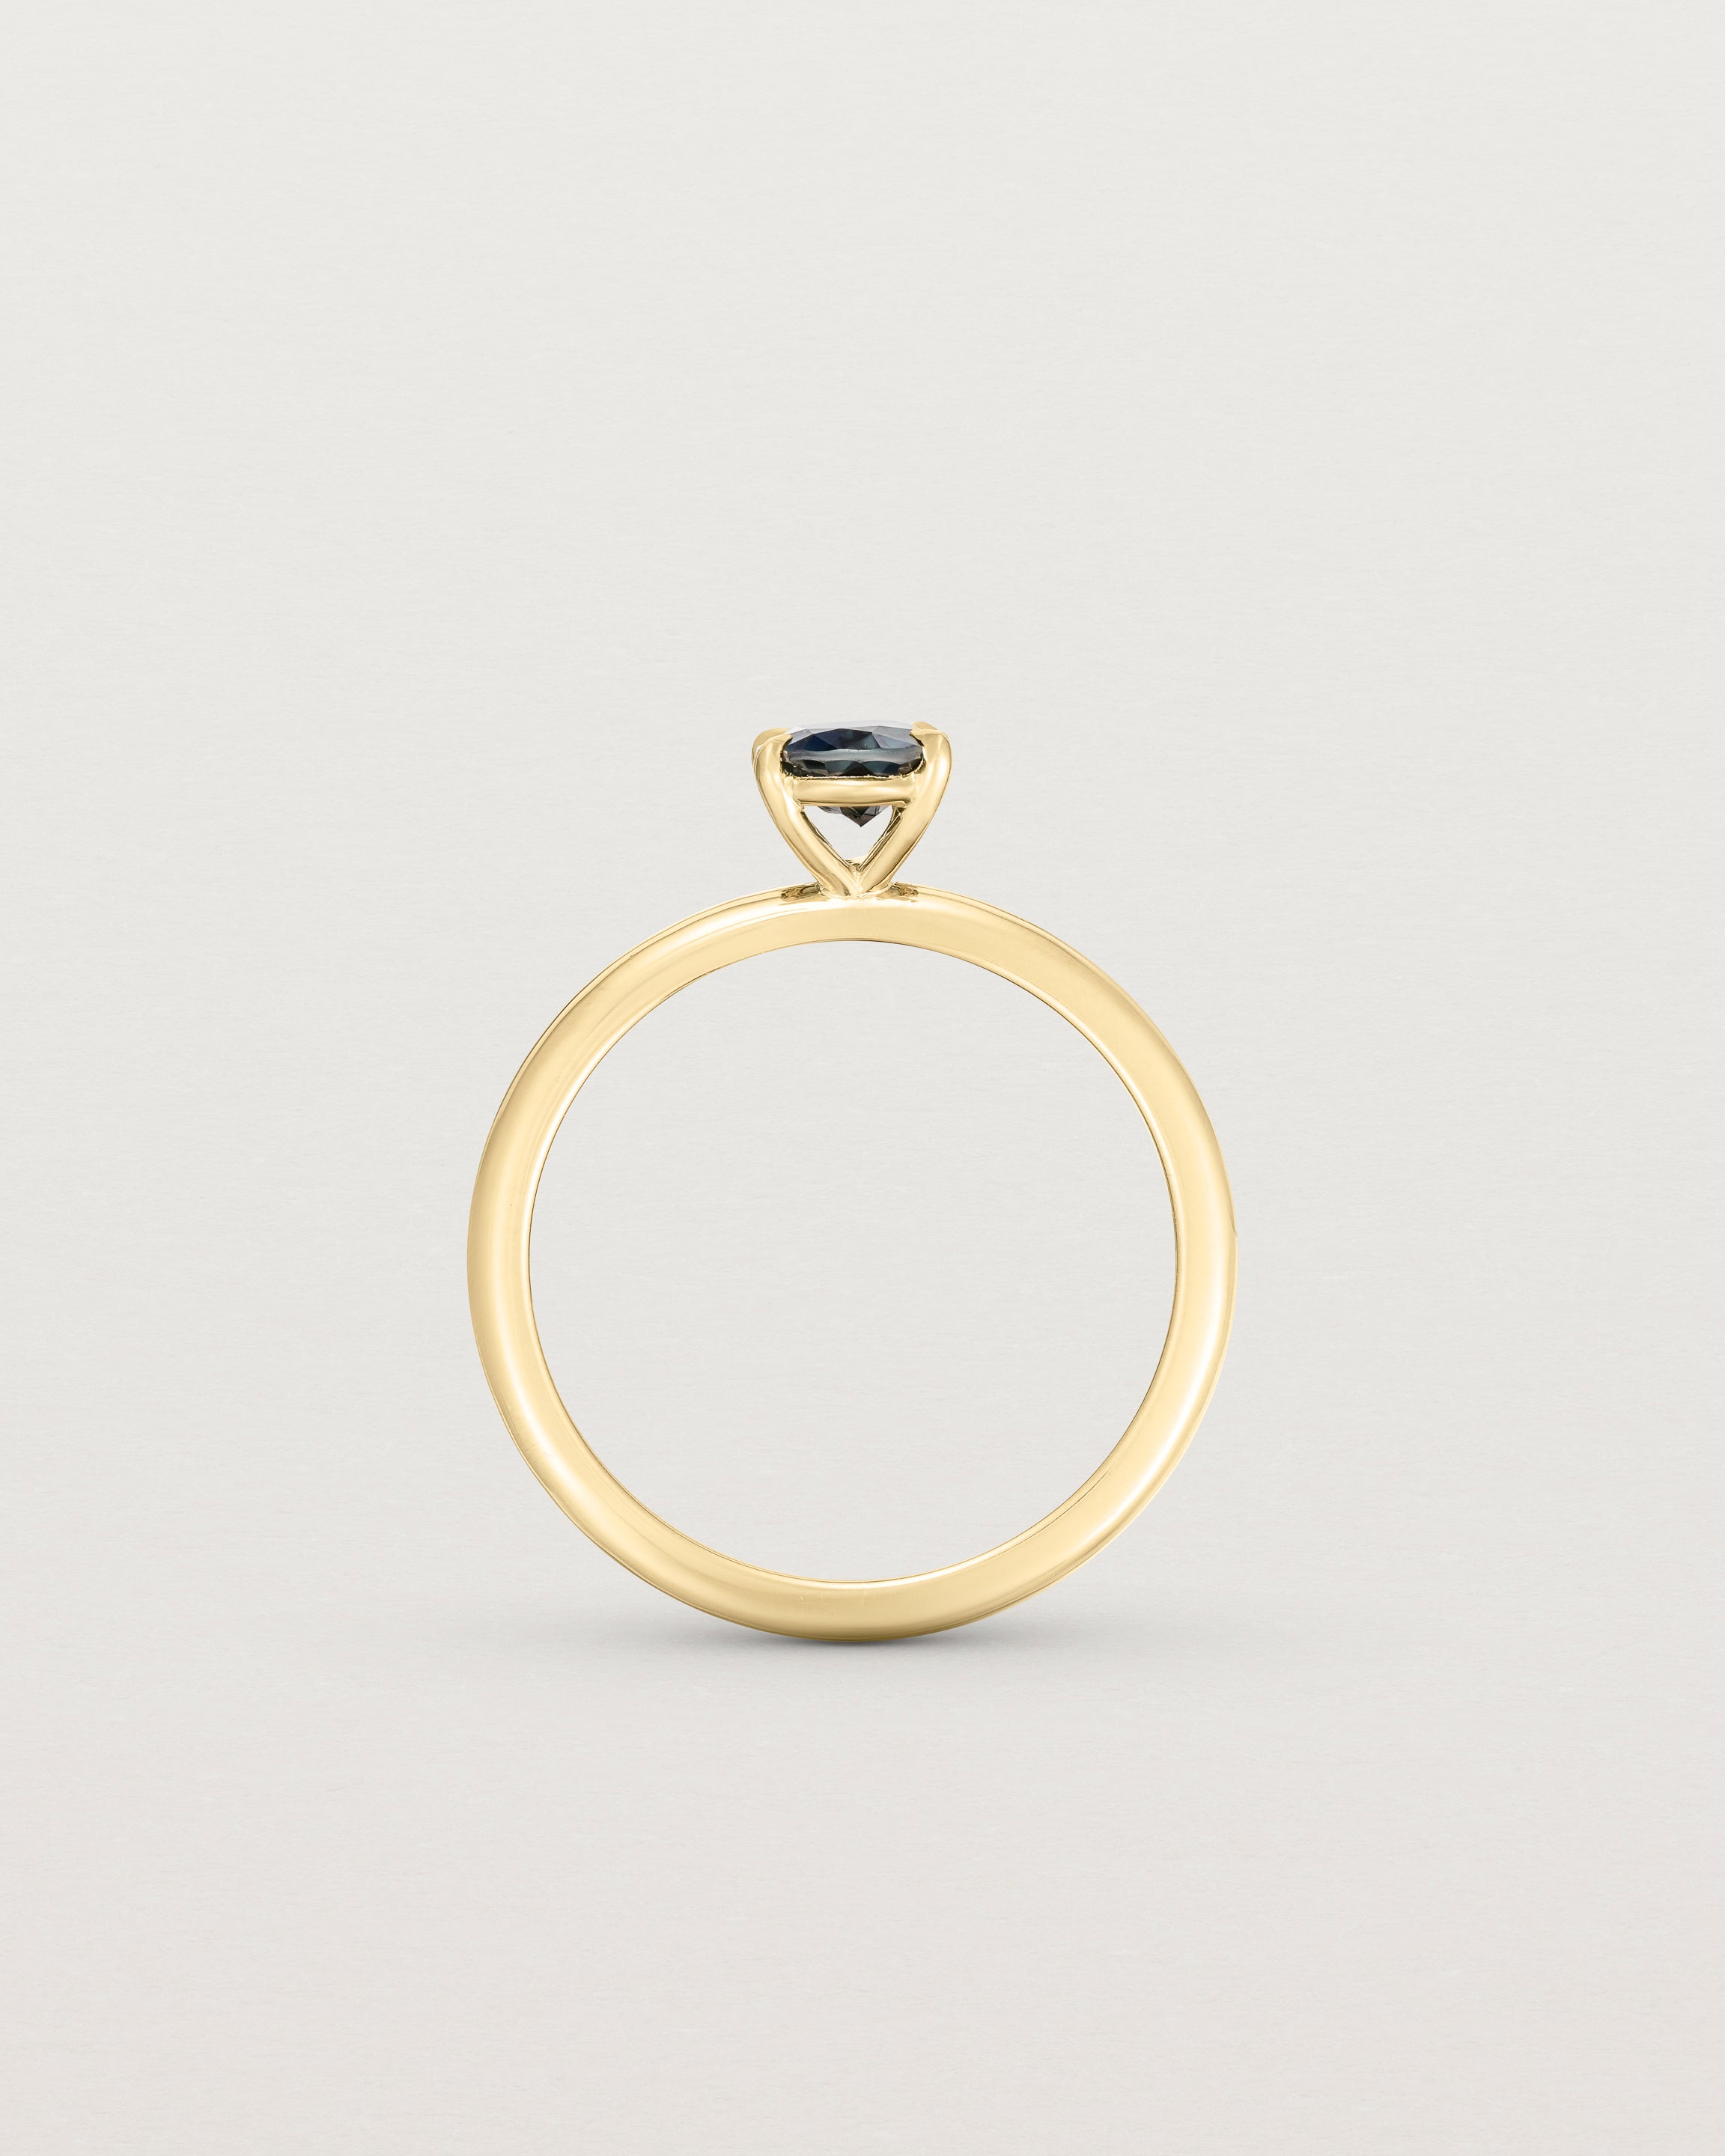 Standing view of the Margot Signature Solitaire | Sapphire.